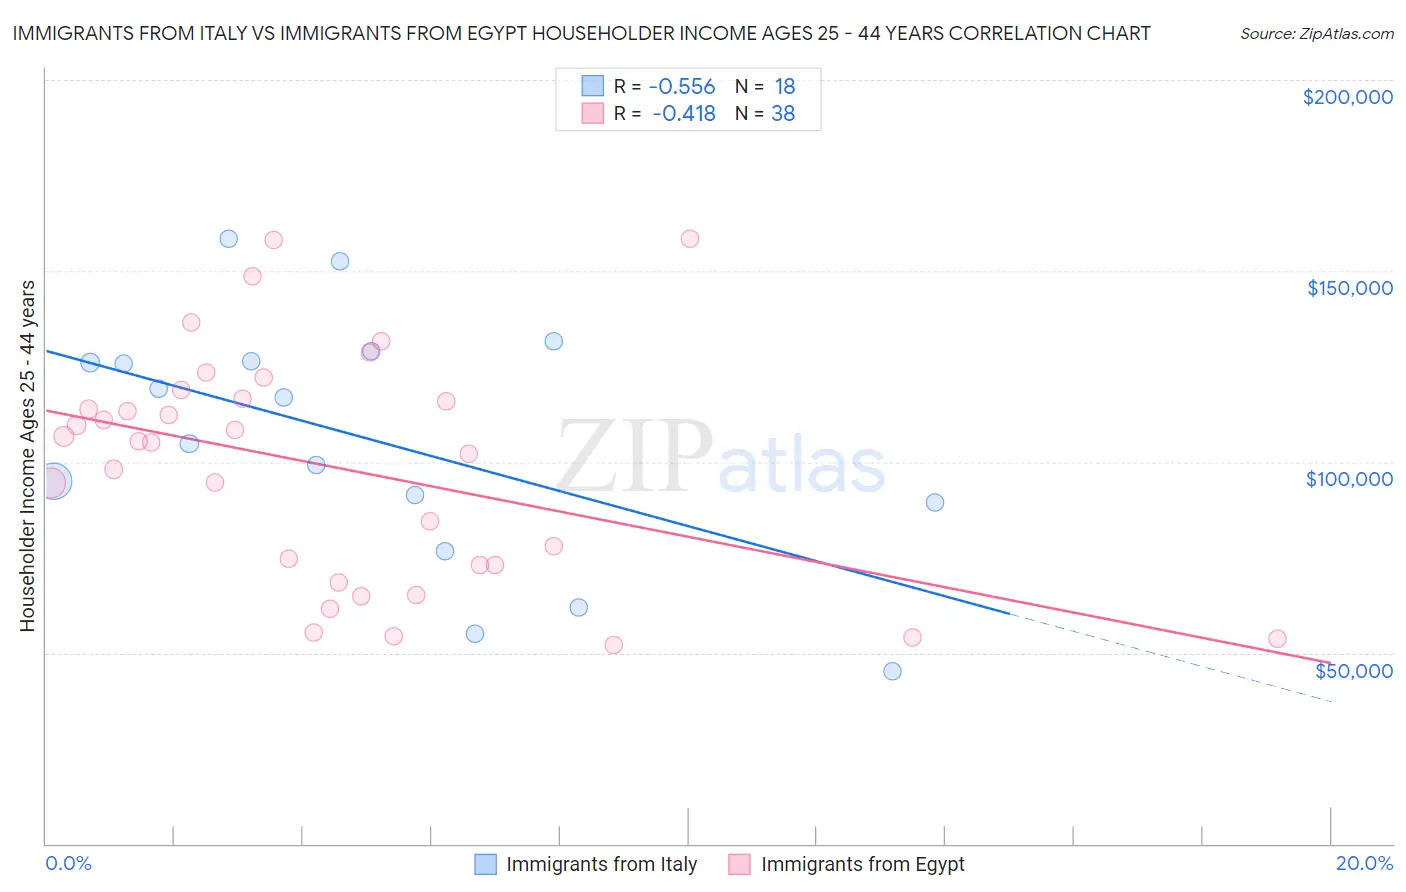 Immigrants from Italy vs Immigrants from Egypt Householder Income Ages 25 - 44 years